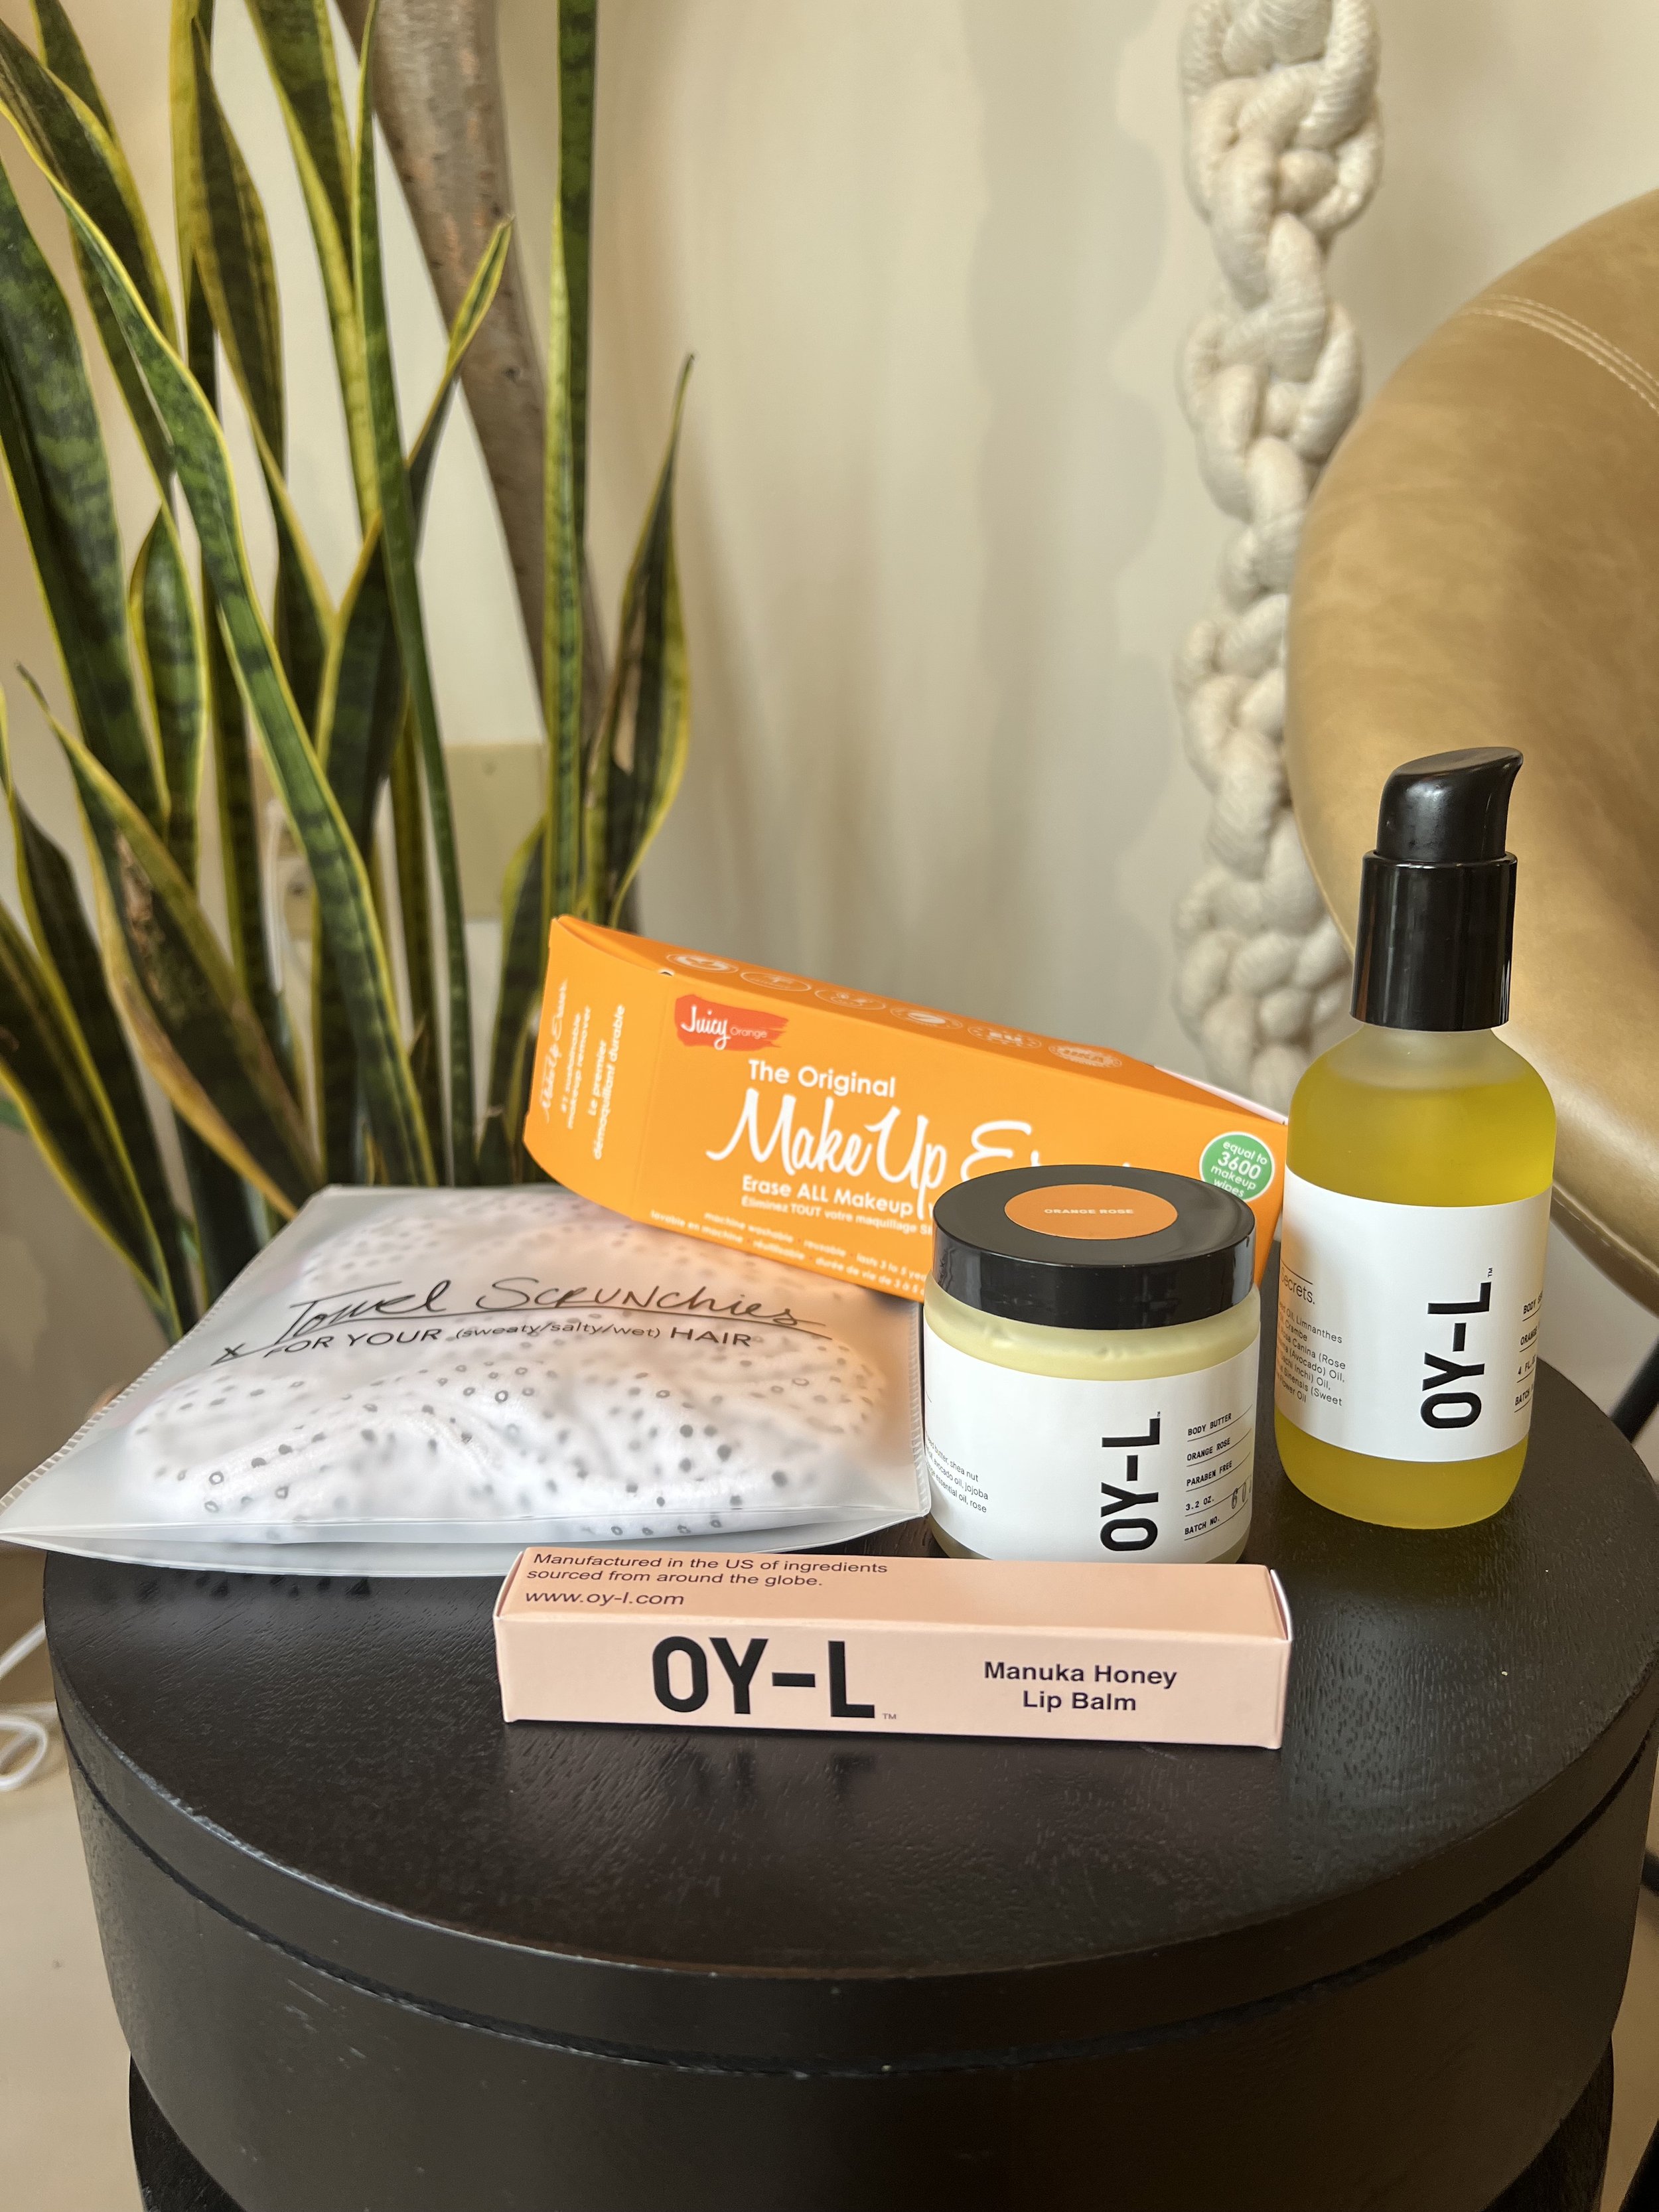 Skin Care from OY-L